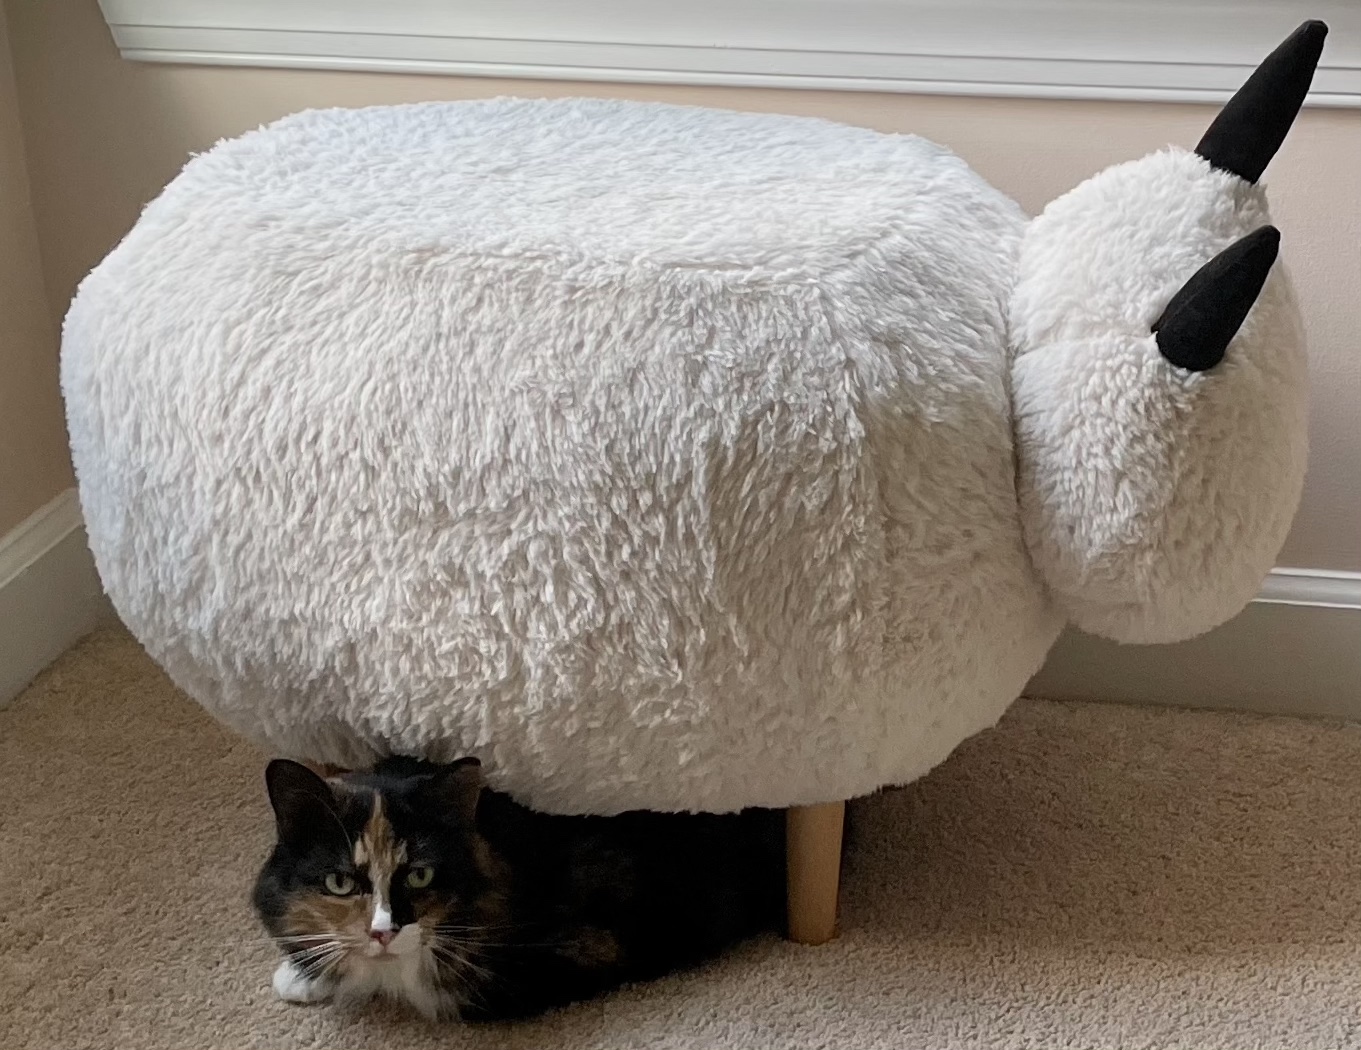 https://www.askamanager.org/wp-content/uploads/2021/10/Olive-and-sheep.jpg